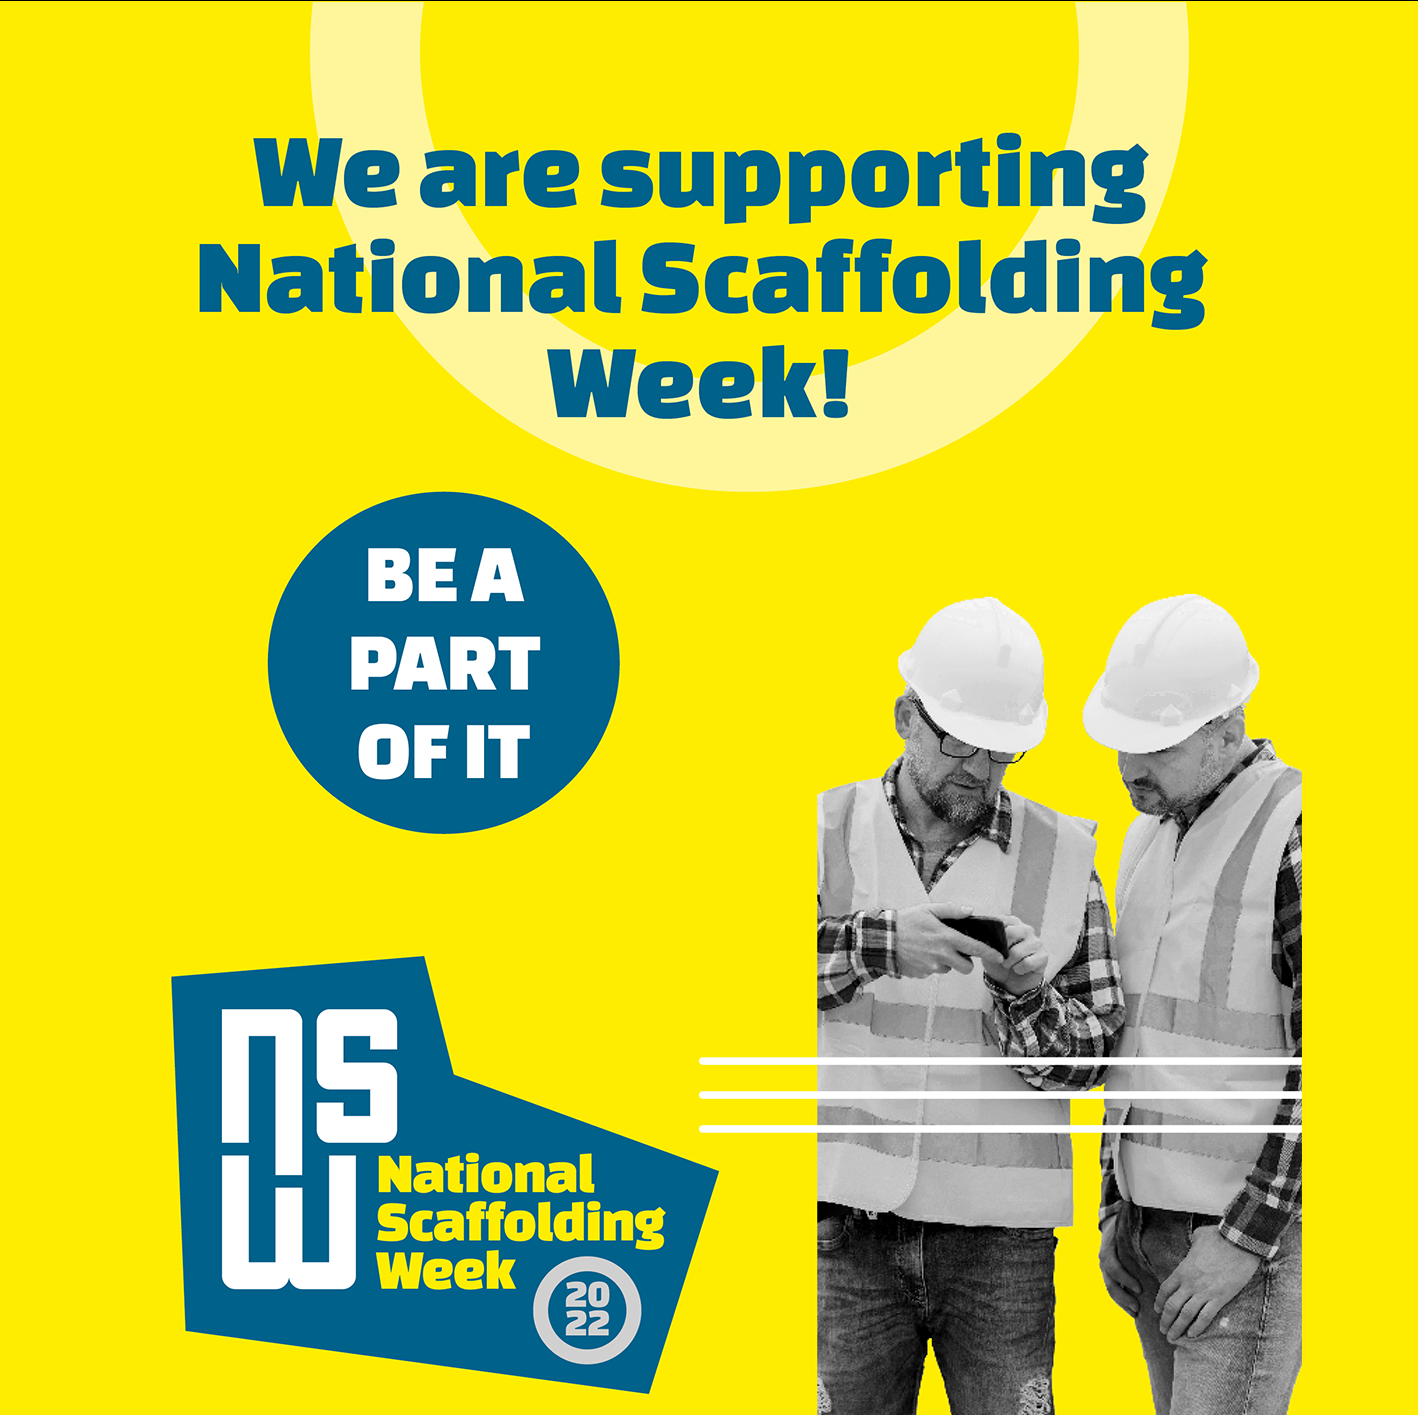 We are supporting National Scaffolding Week!